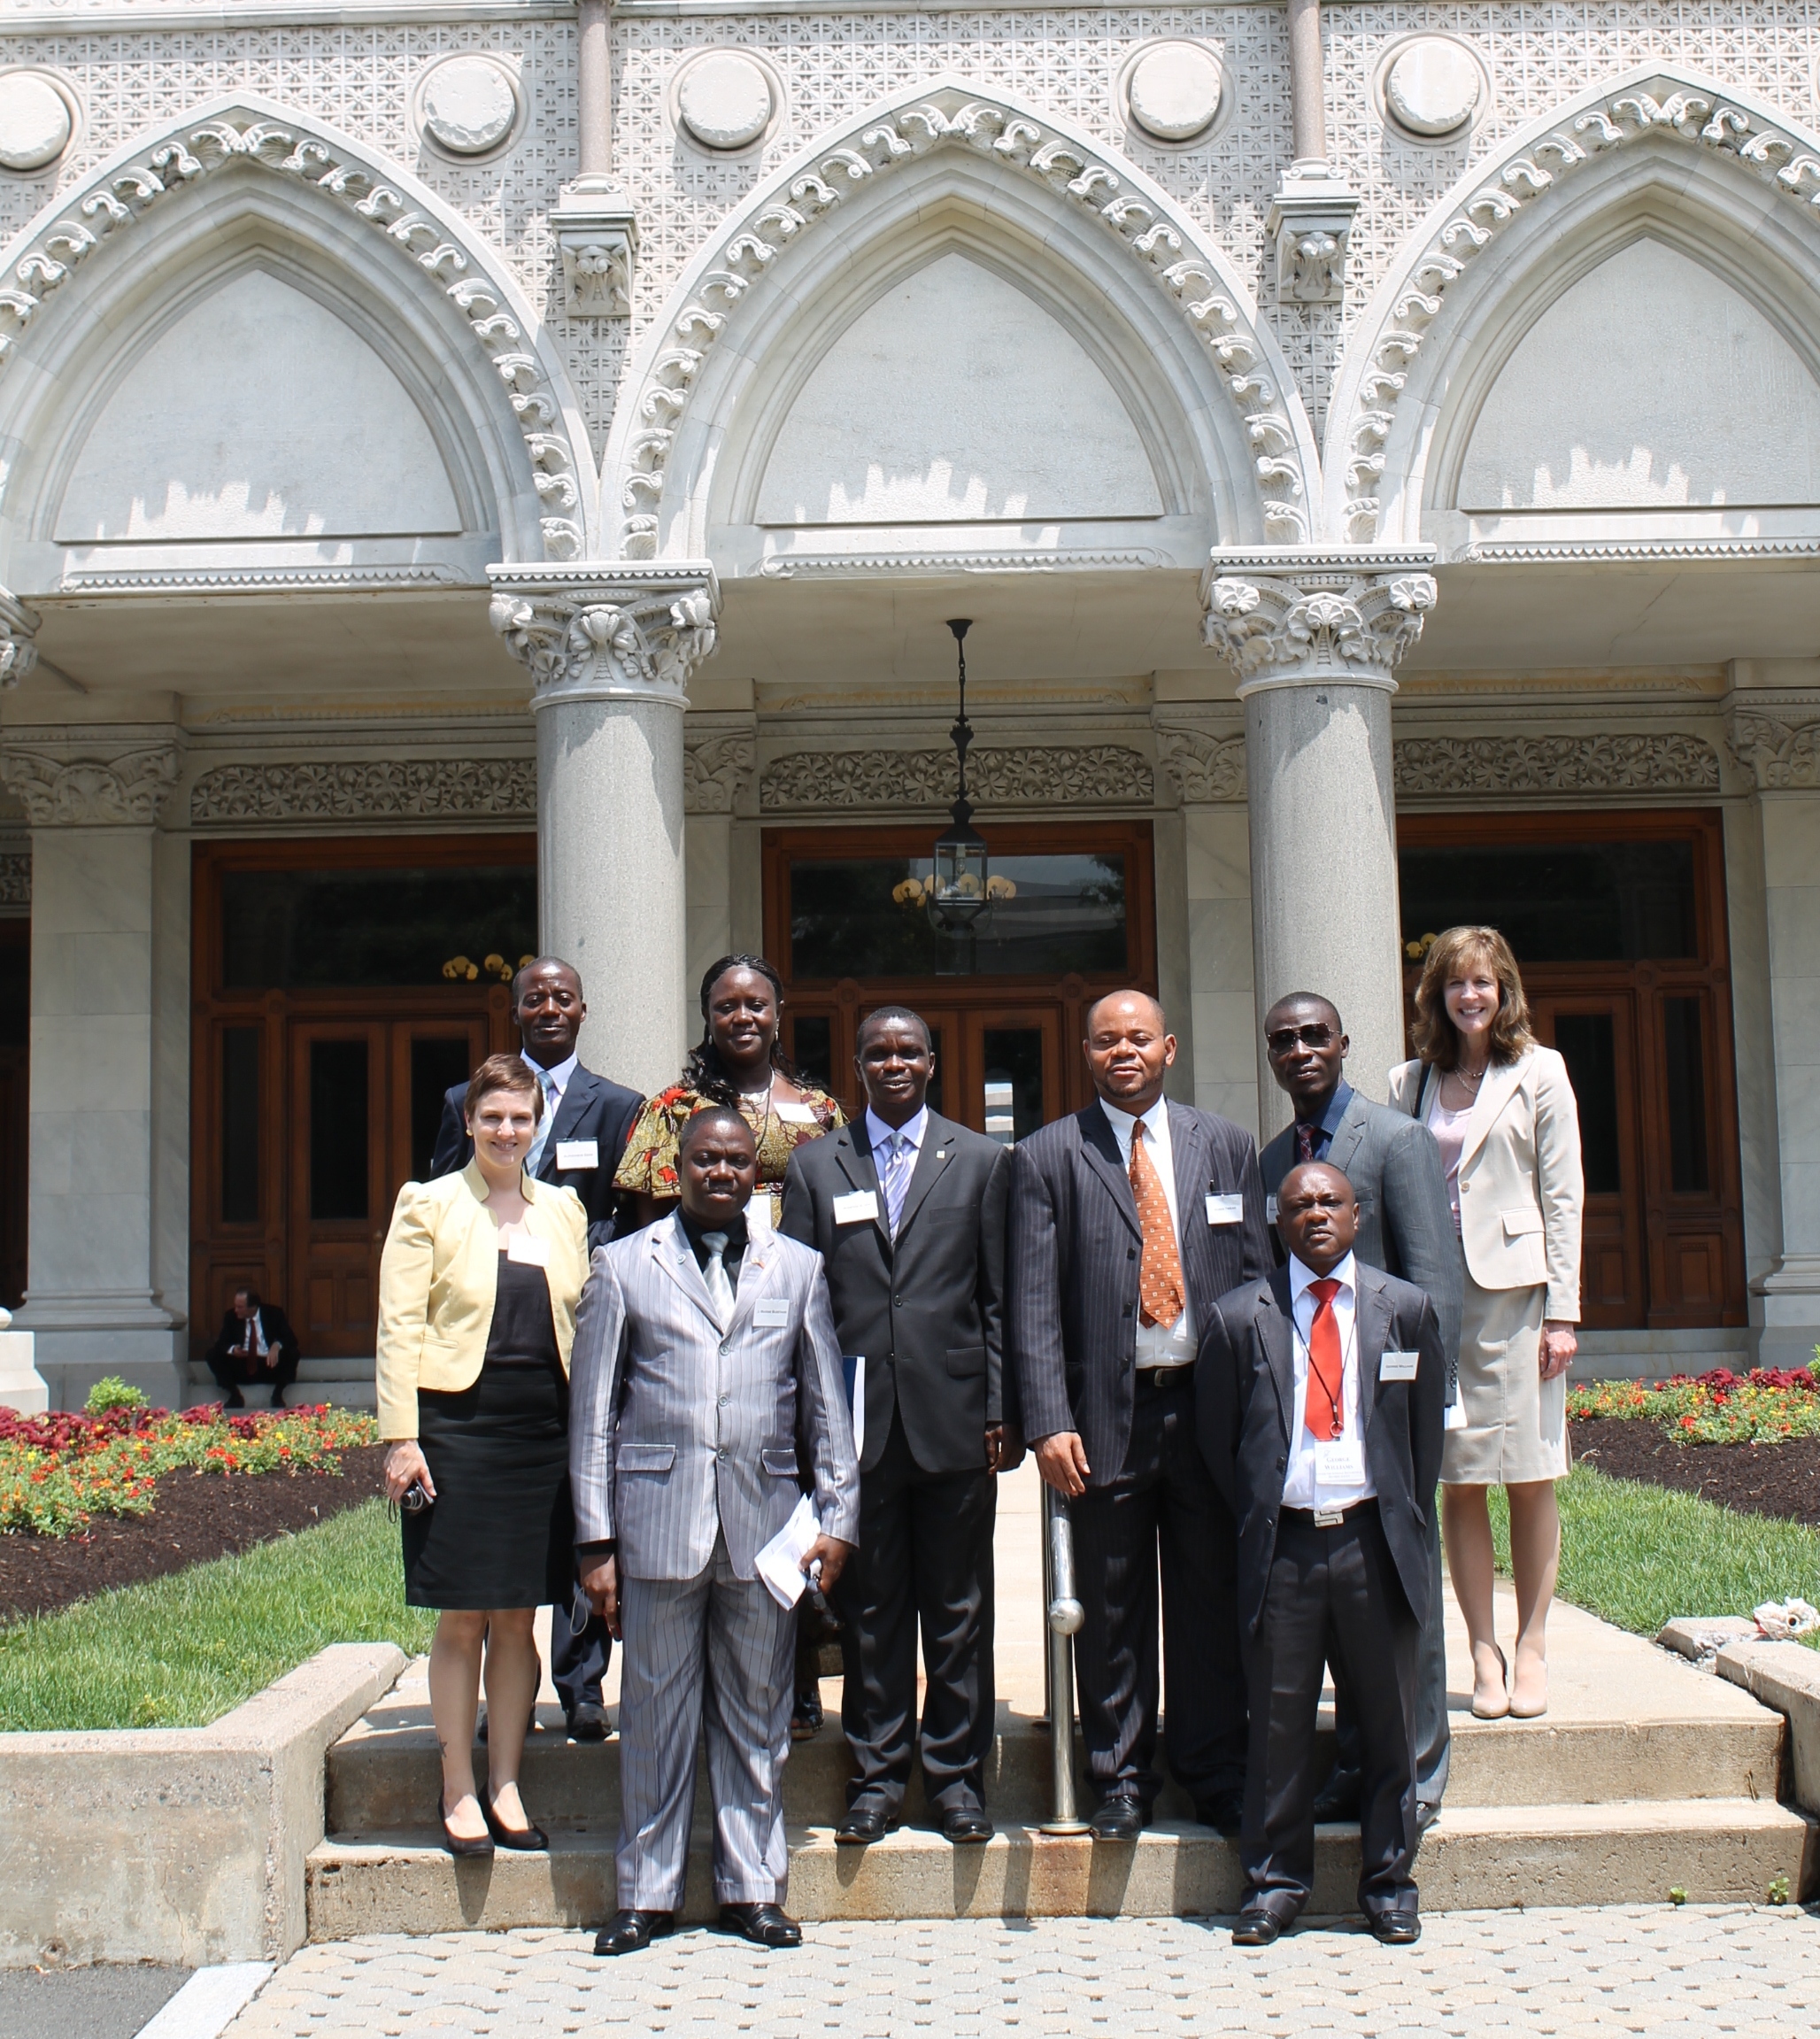 The FOIC was honored to host a group of governmental officials on a study mission from Liberia on June 3 -4 2013.  These officials are involved in the implementation of FOI laws in Liberia, after years of civil war and unrest in that country.